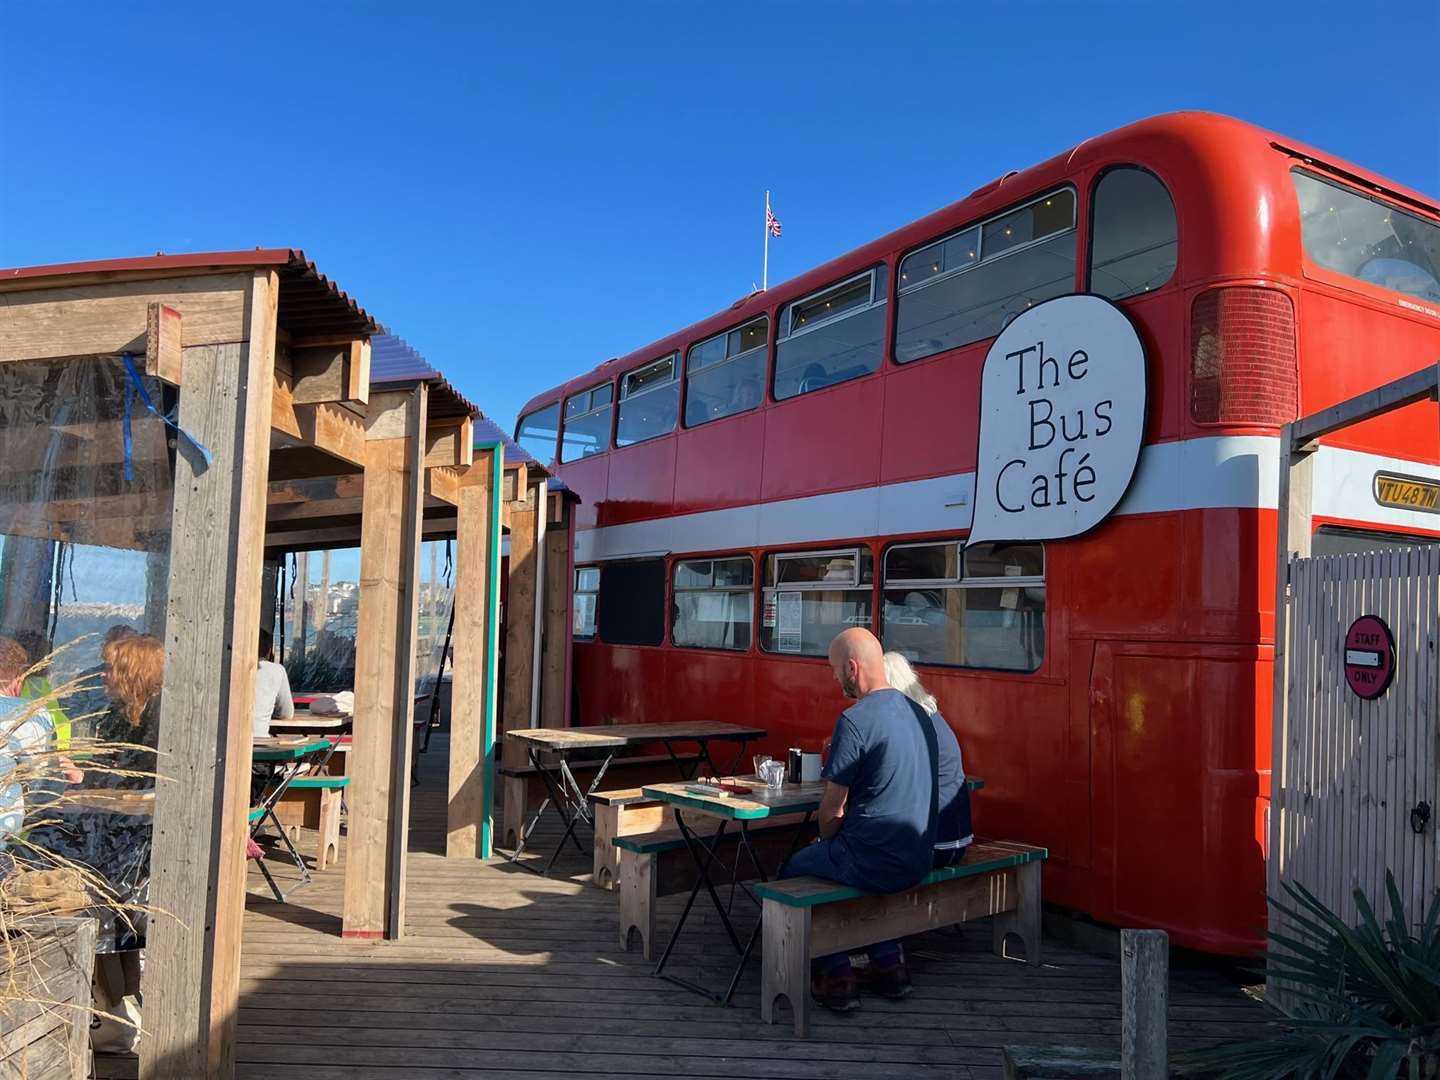 The Bus Café is easy to spot